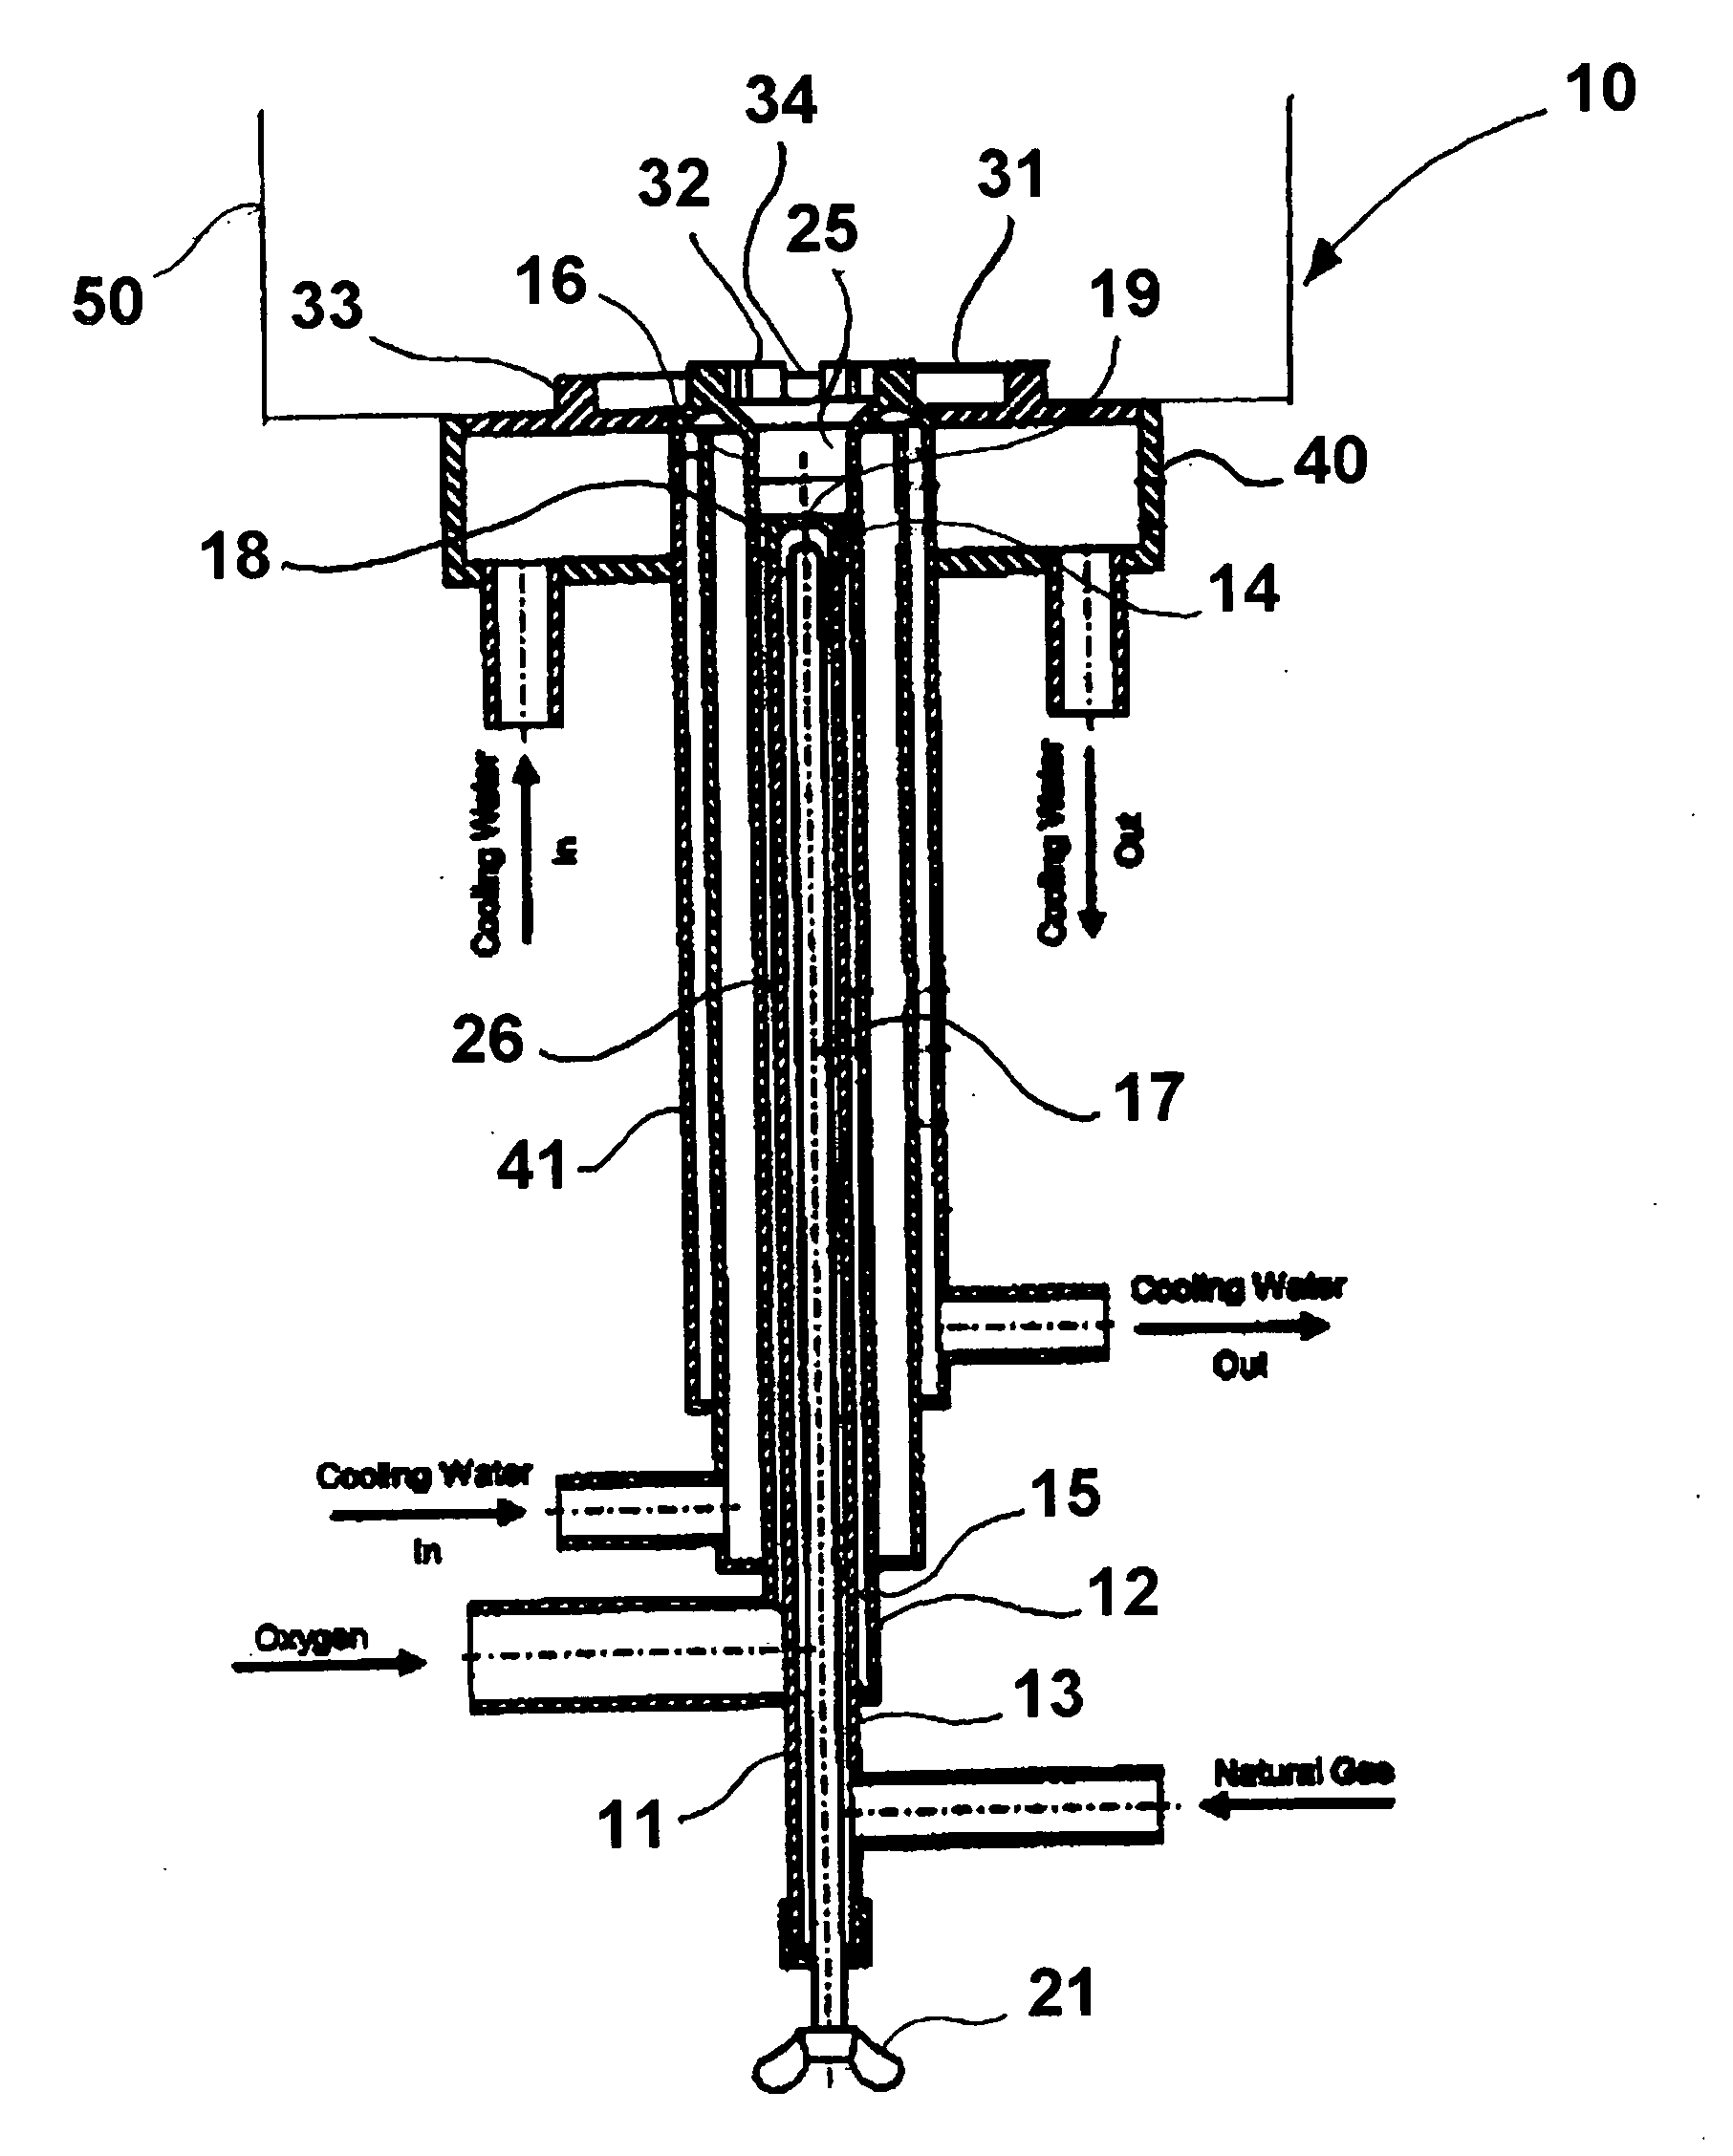 Process and apparatus for uniform combustion within a molten material